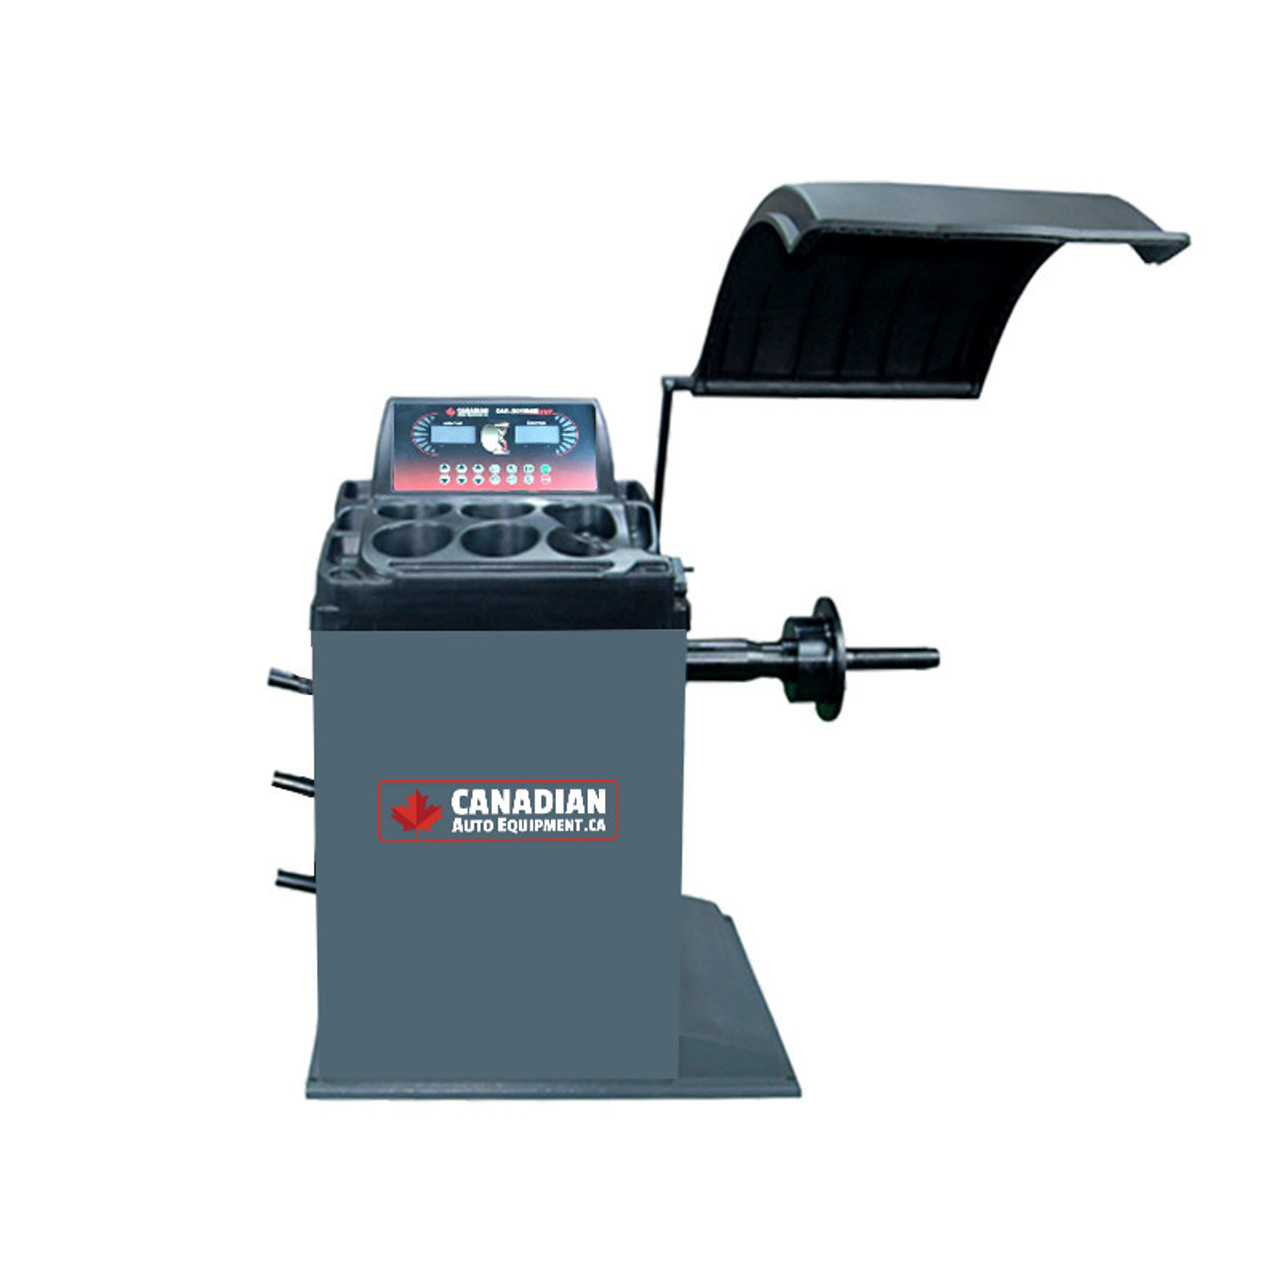 CAE-2725DAA Tire Changer with Left & Right Hand Assist & CAE-3019 Wheel Balancer with Manual Entry